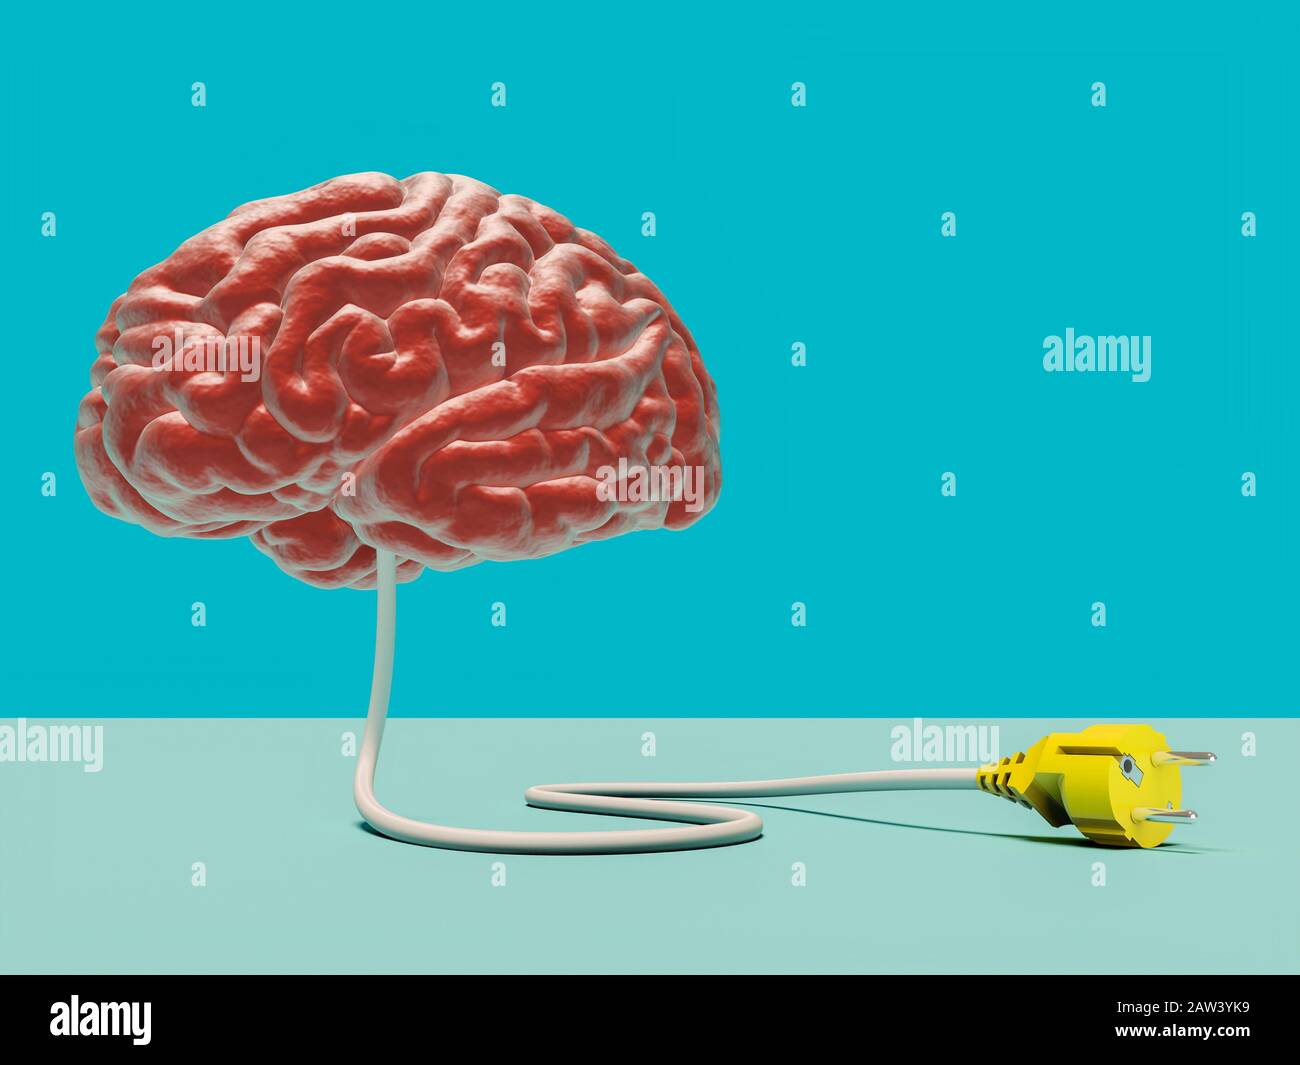 conceptual 3d render image of a brain with a wire and a detached plug. Concept of collective intelligence and disinformation. Stock Photo